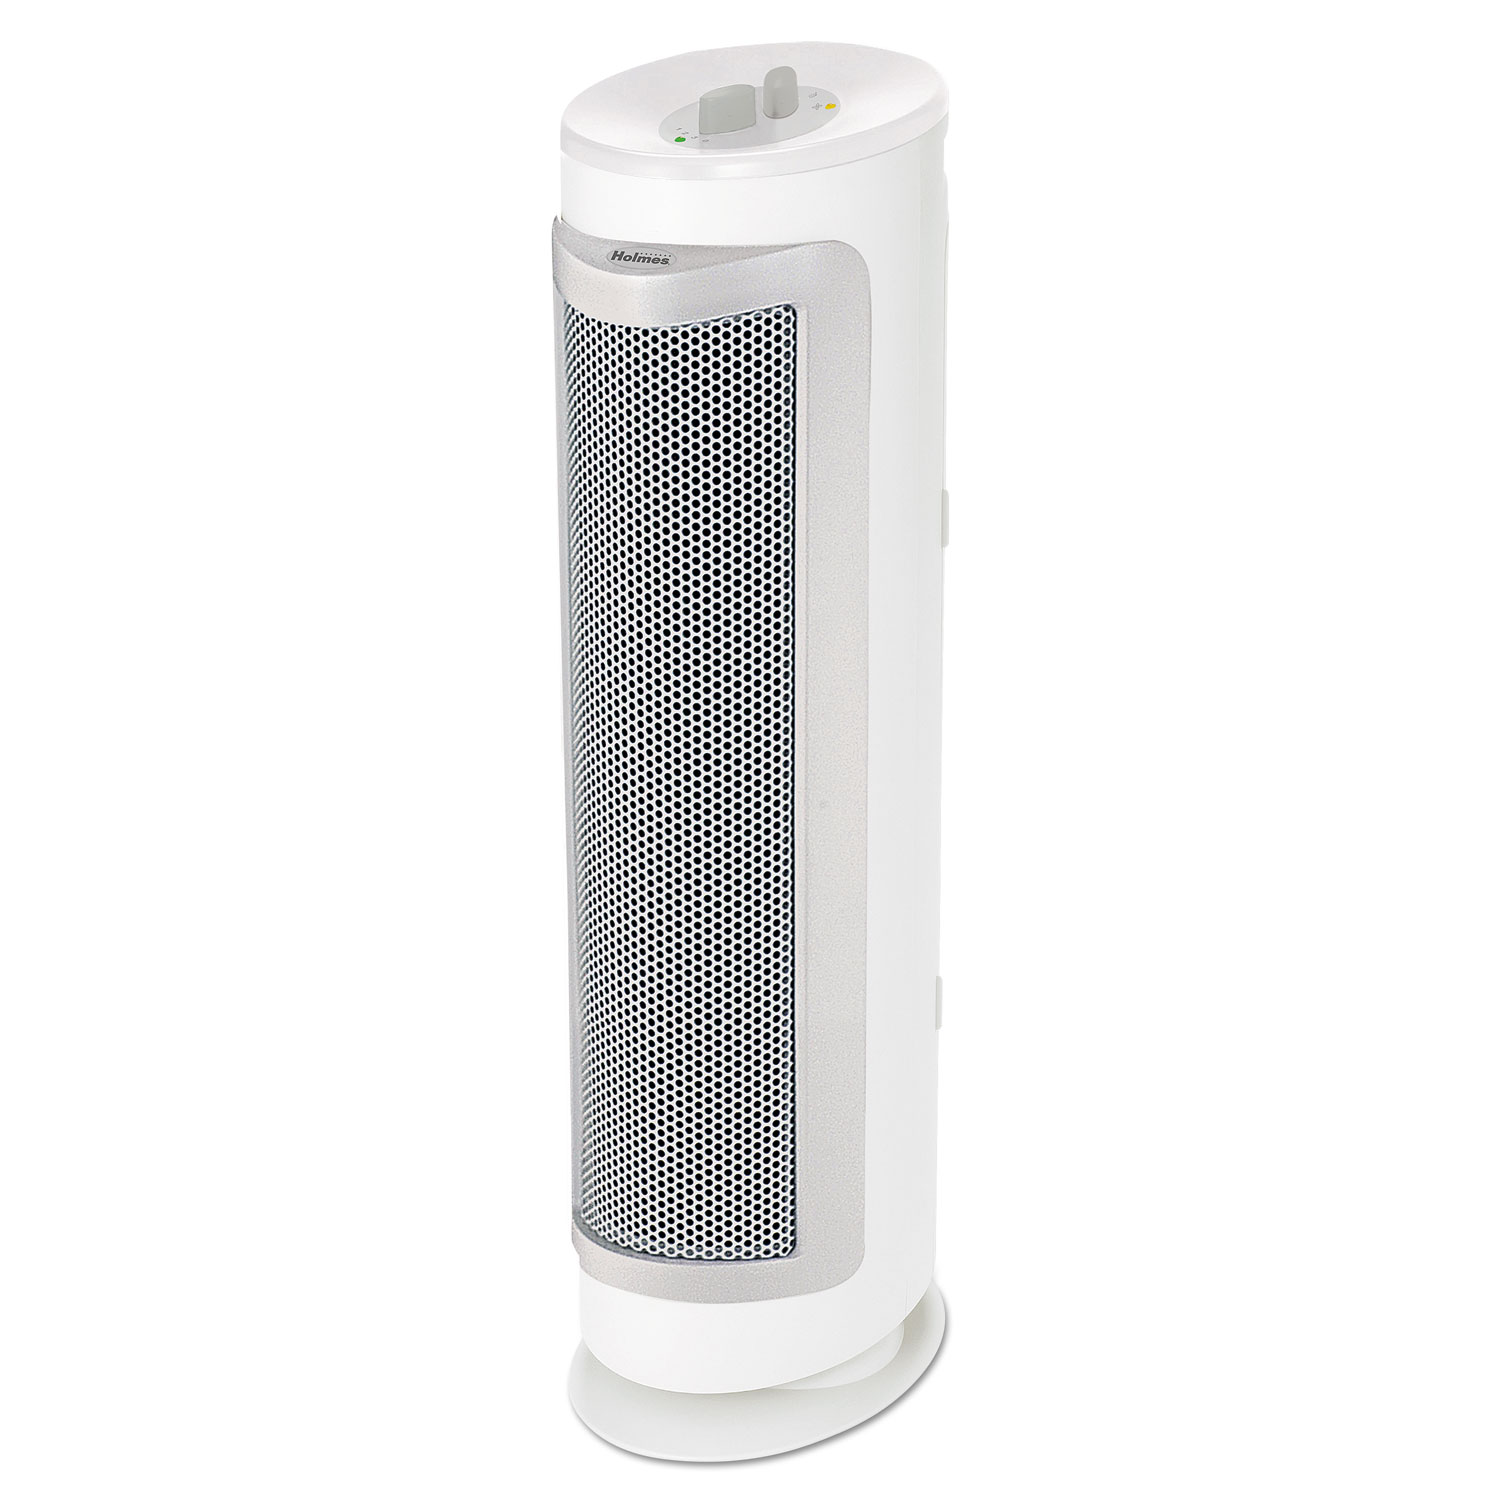  Holmes HAP716NU1 HEPA Type Tower, 150 sq. ft Room Capacity, White (HLSHAP716NU) 